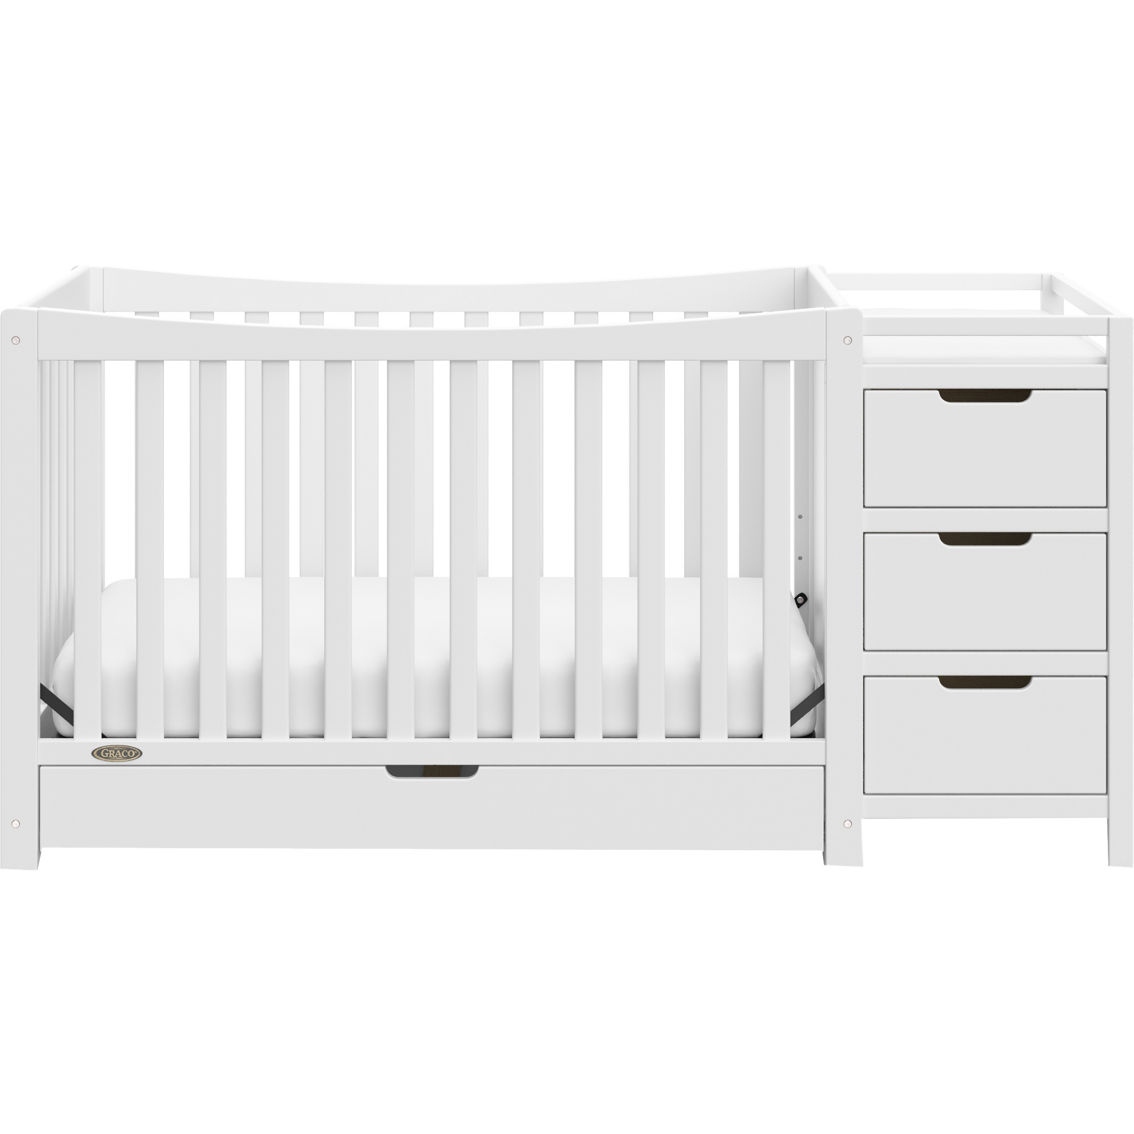 Graco Remi 4 in 1 Convertible Crib and Changer - Image 2 of 8